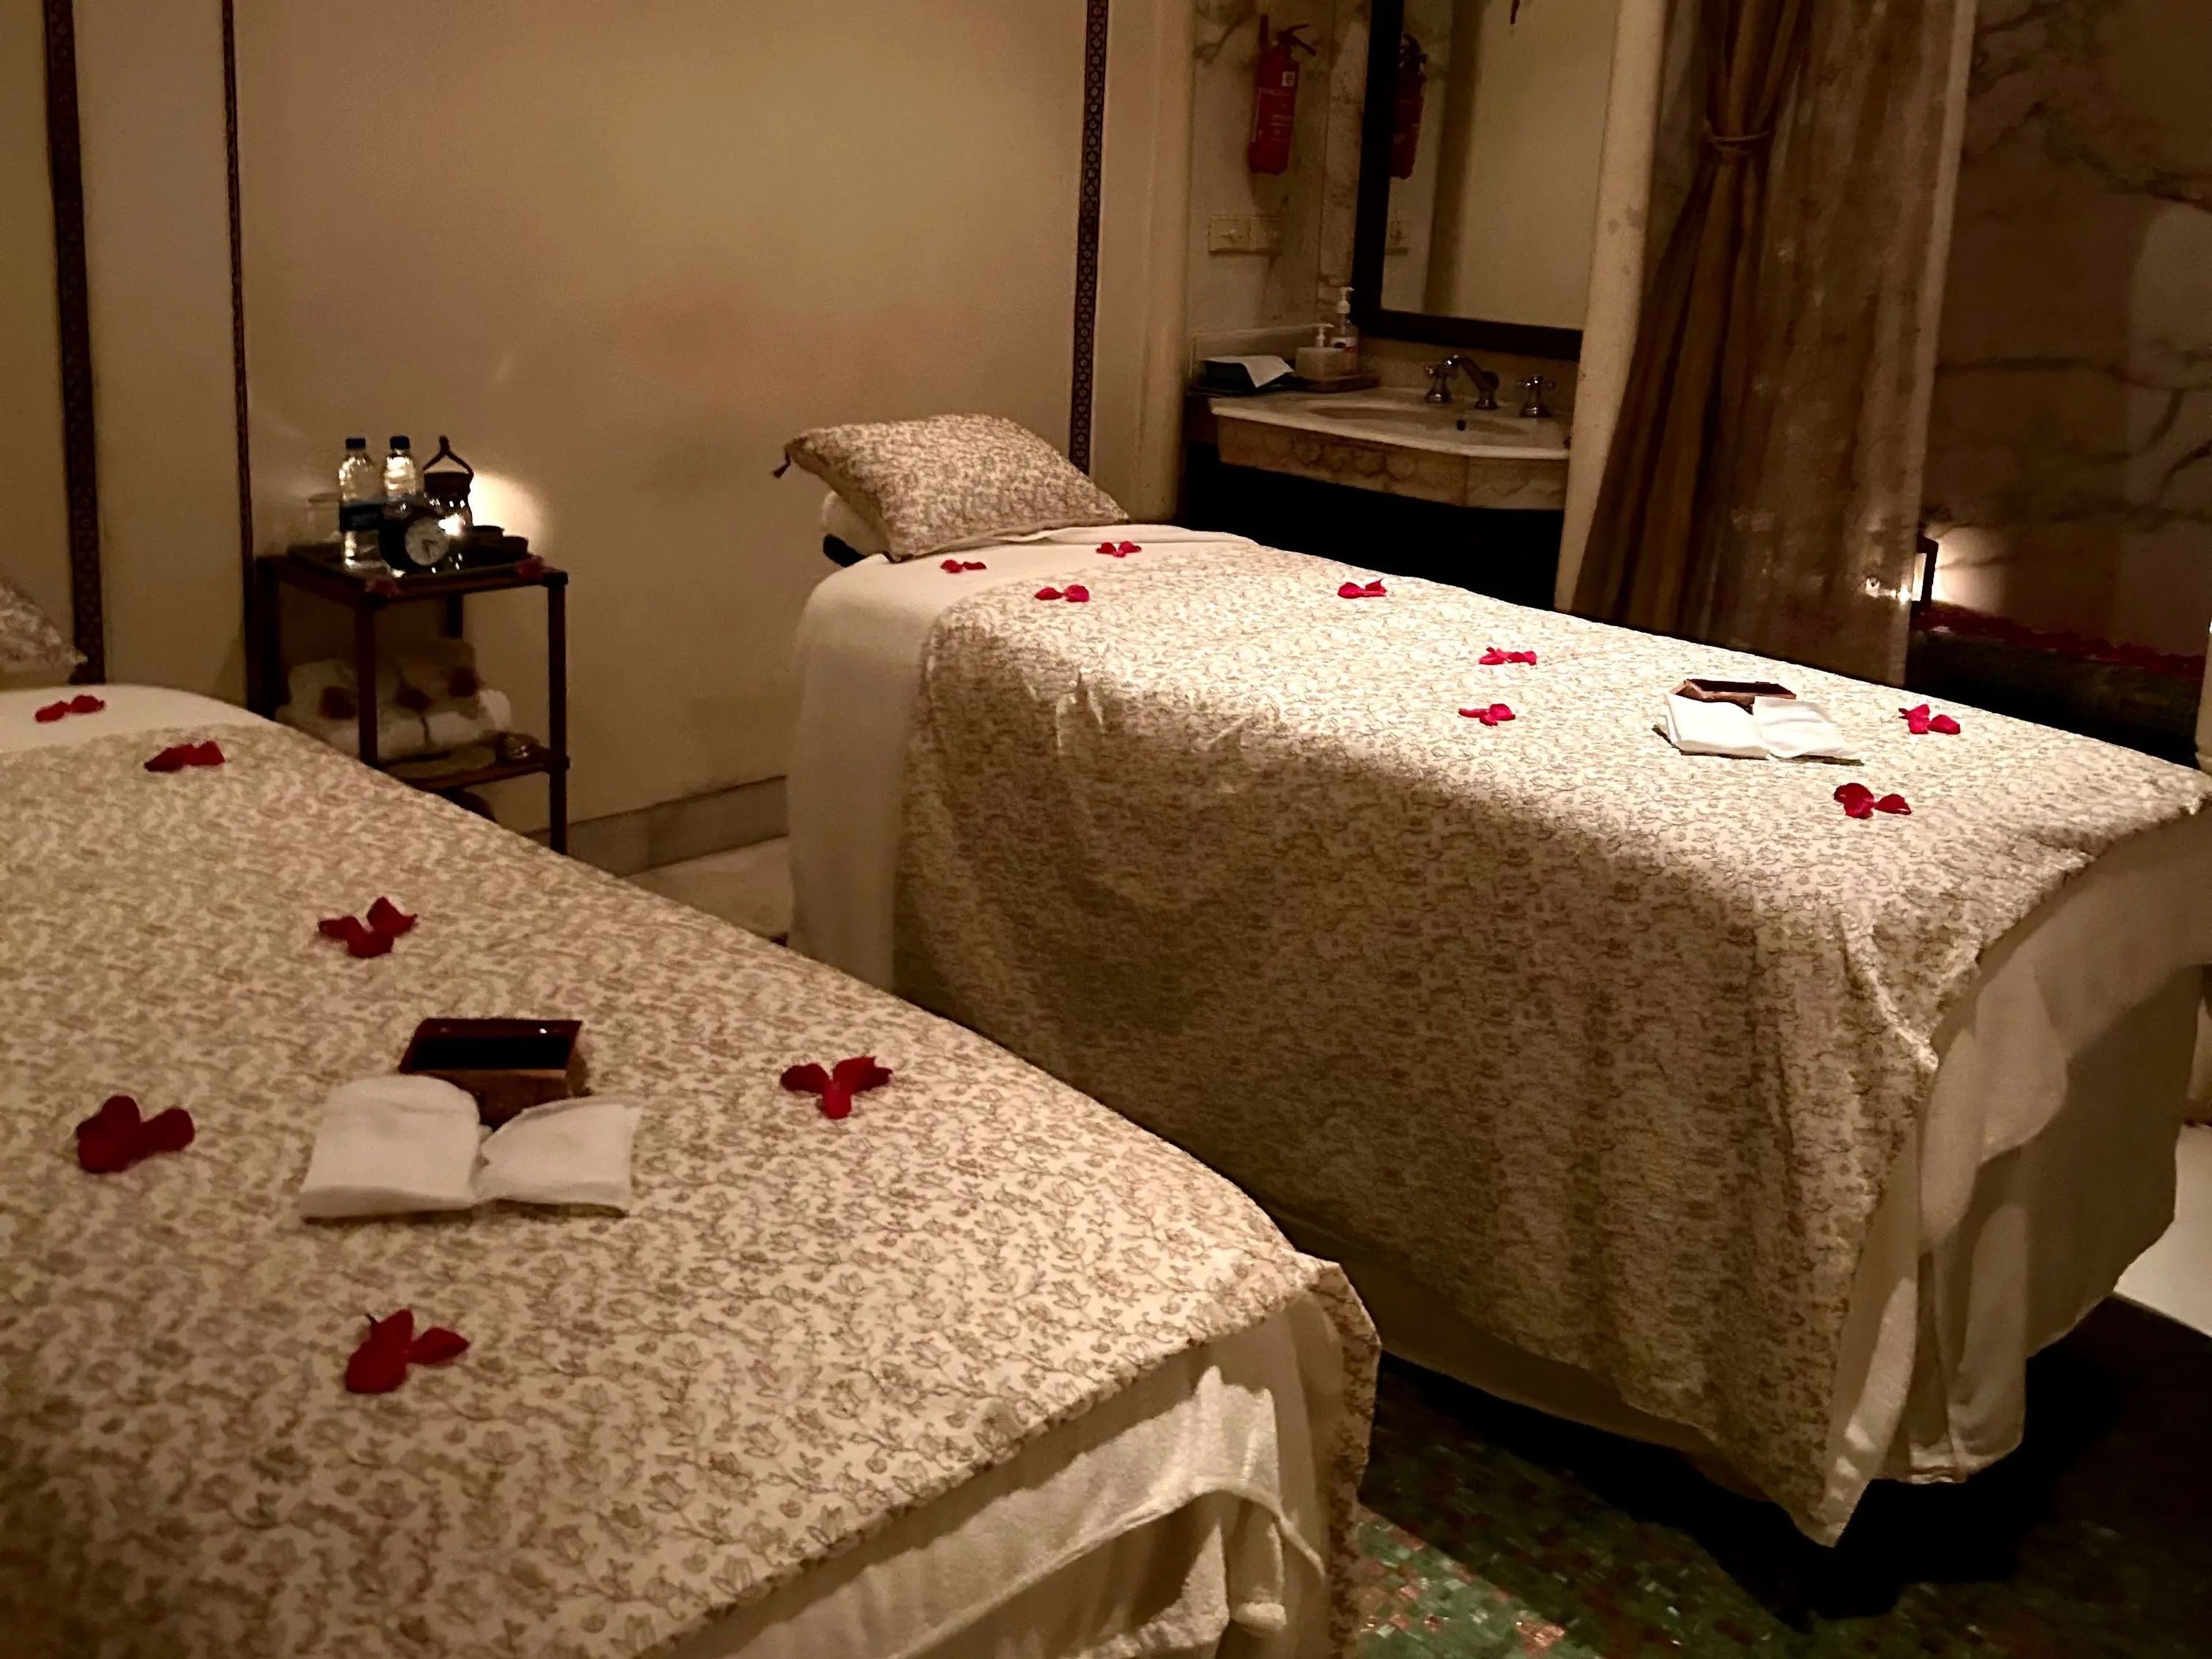 Two massage beds with rose petals on top.